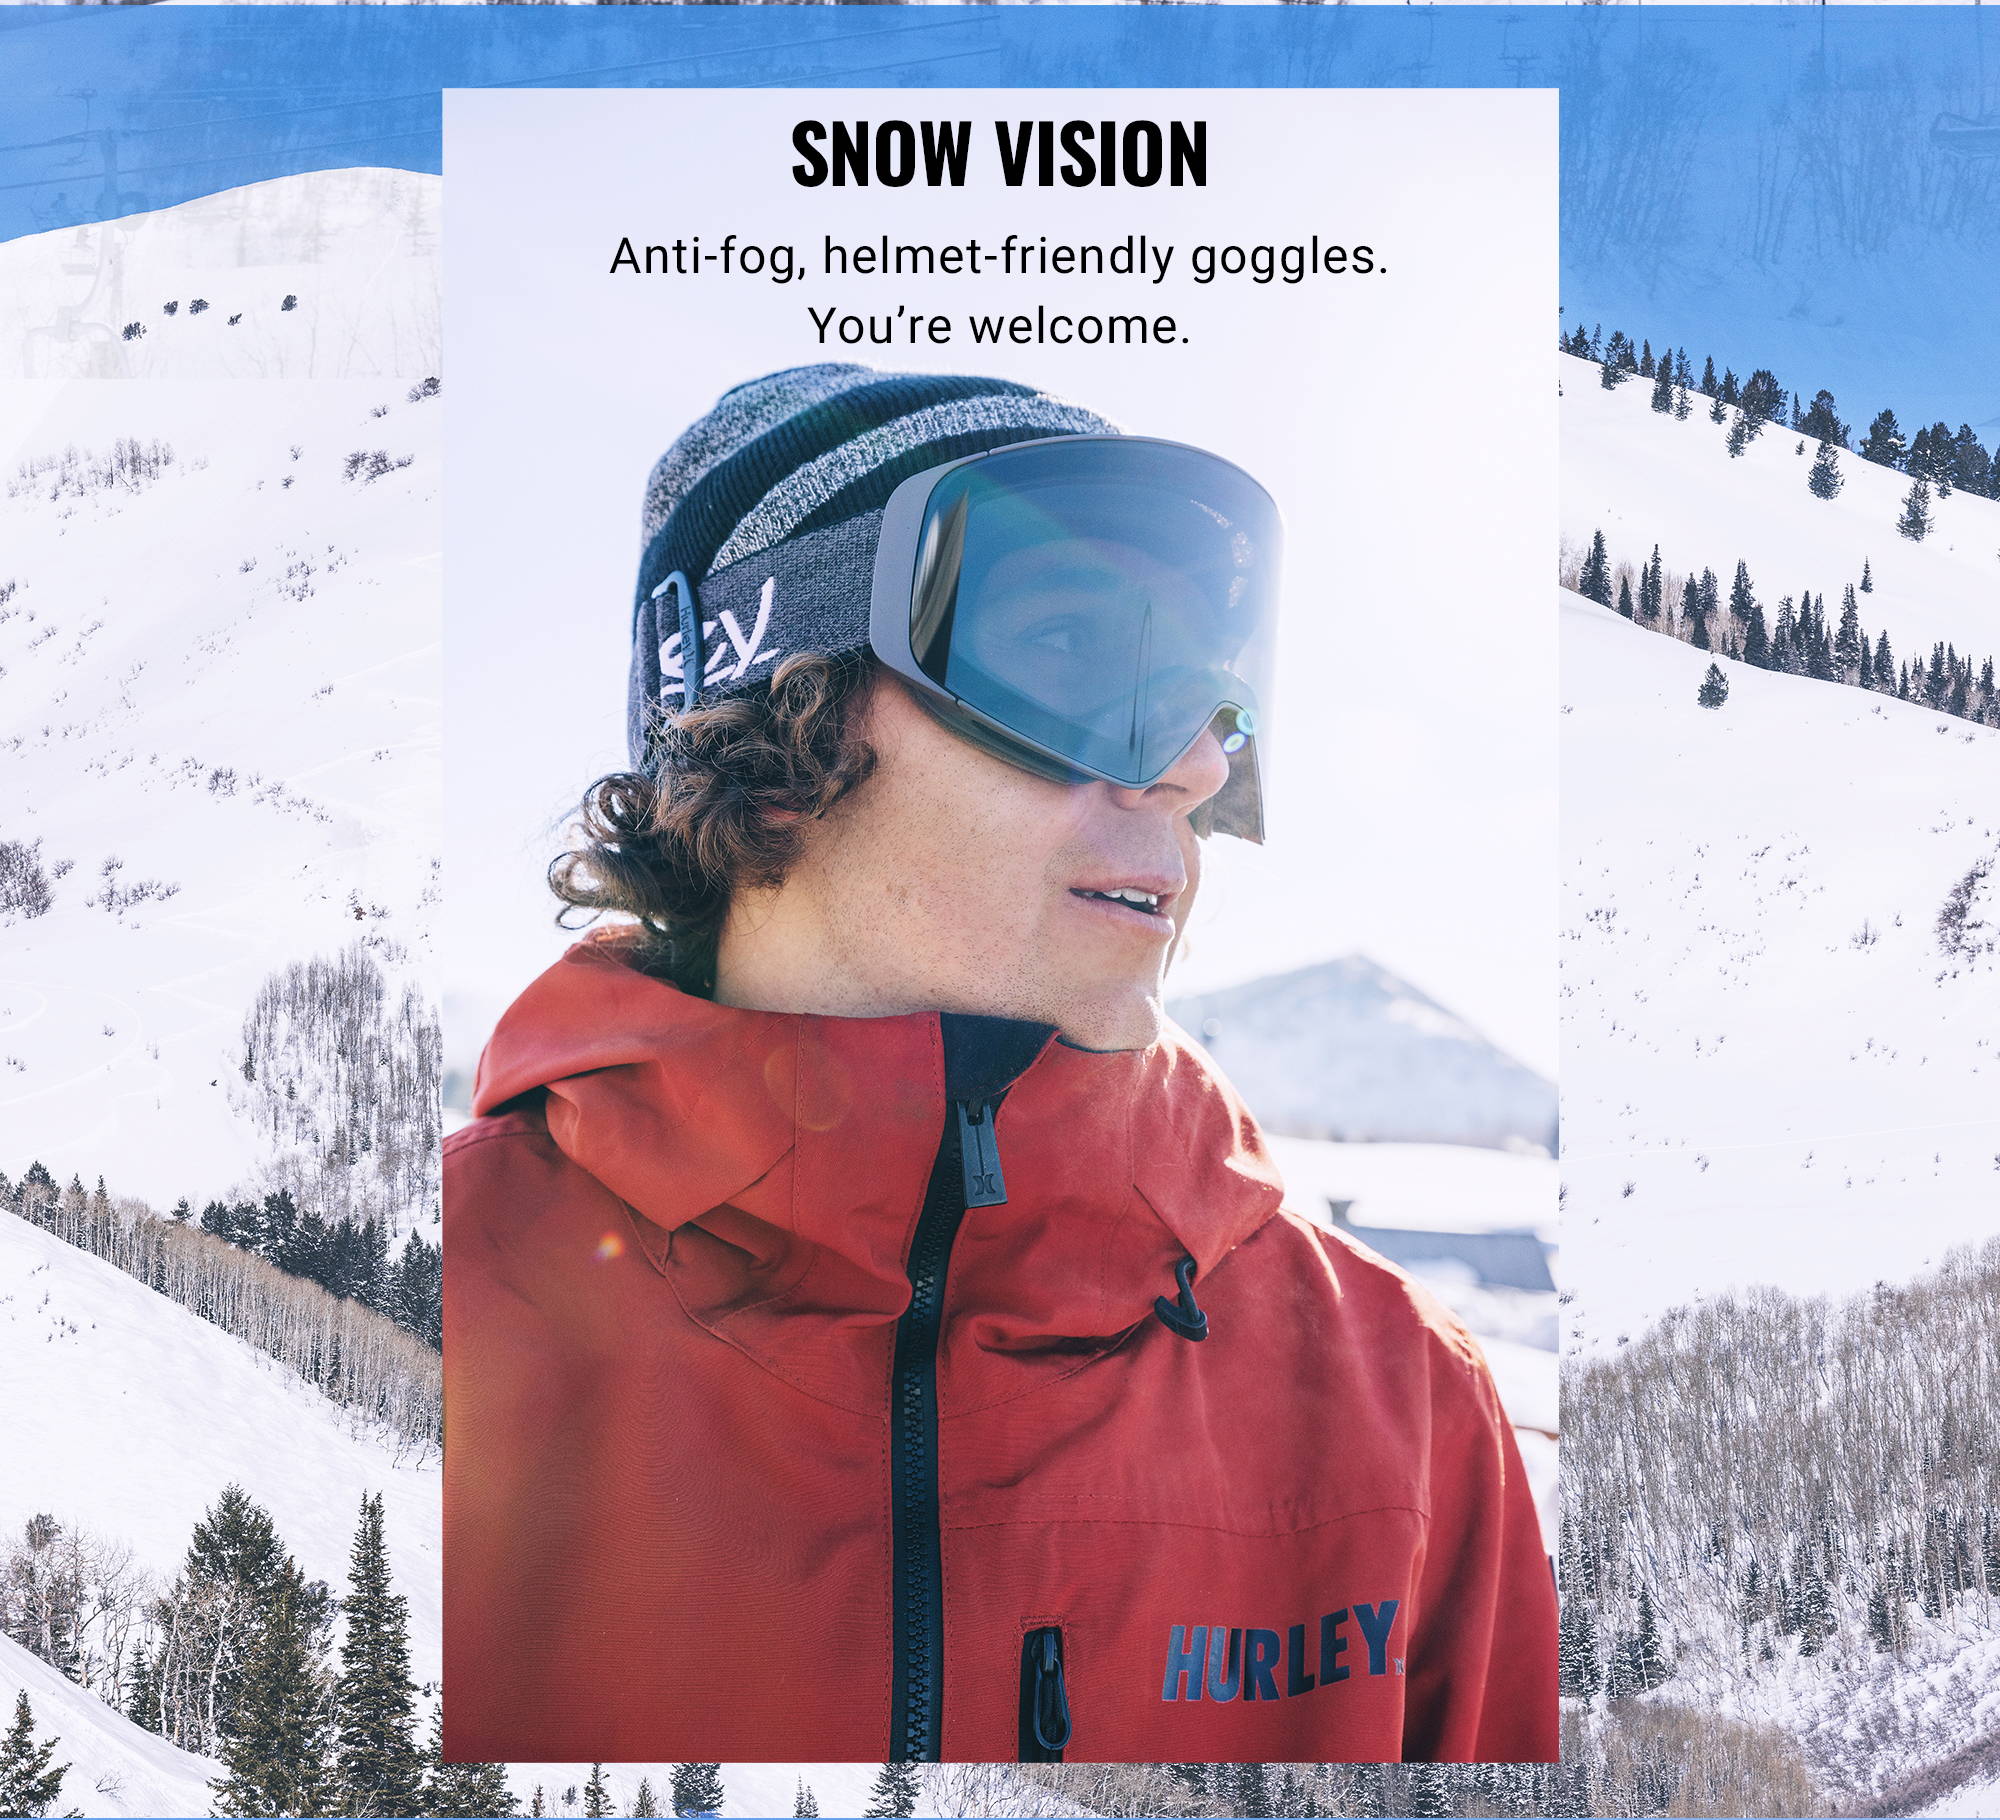 SNOW VISION Anti-fog, helmet-friendly goggles. You’re welcome. 